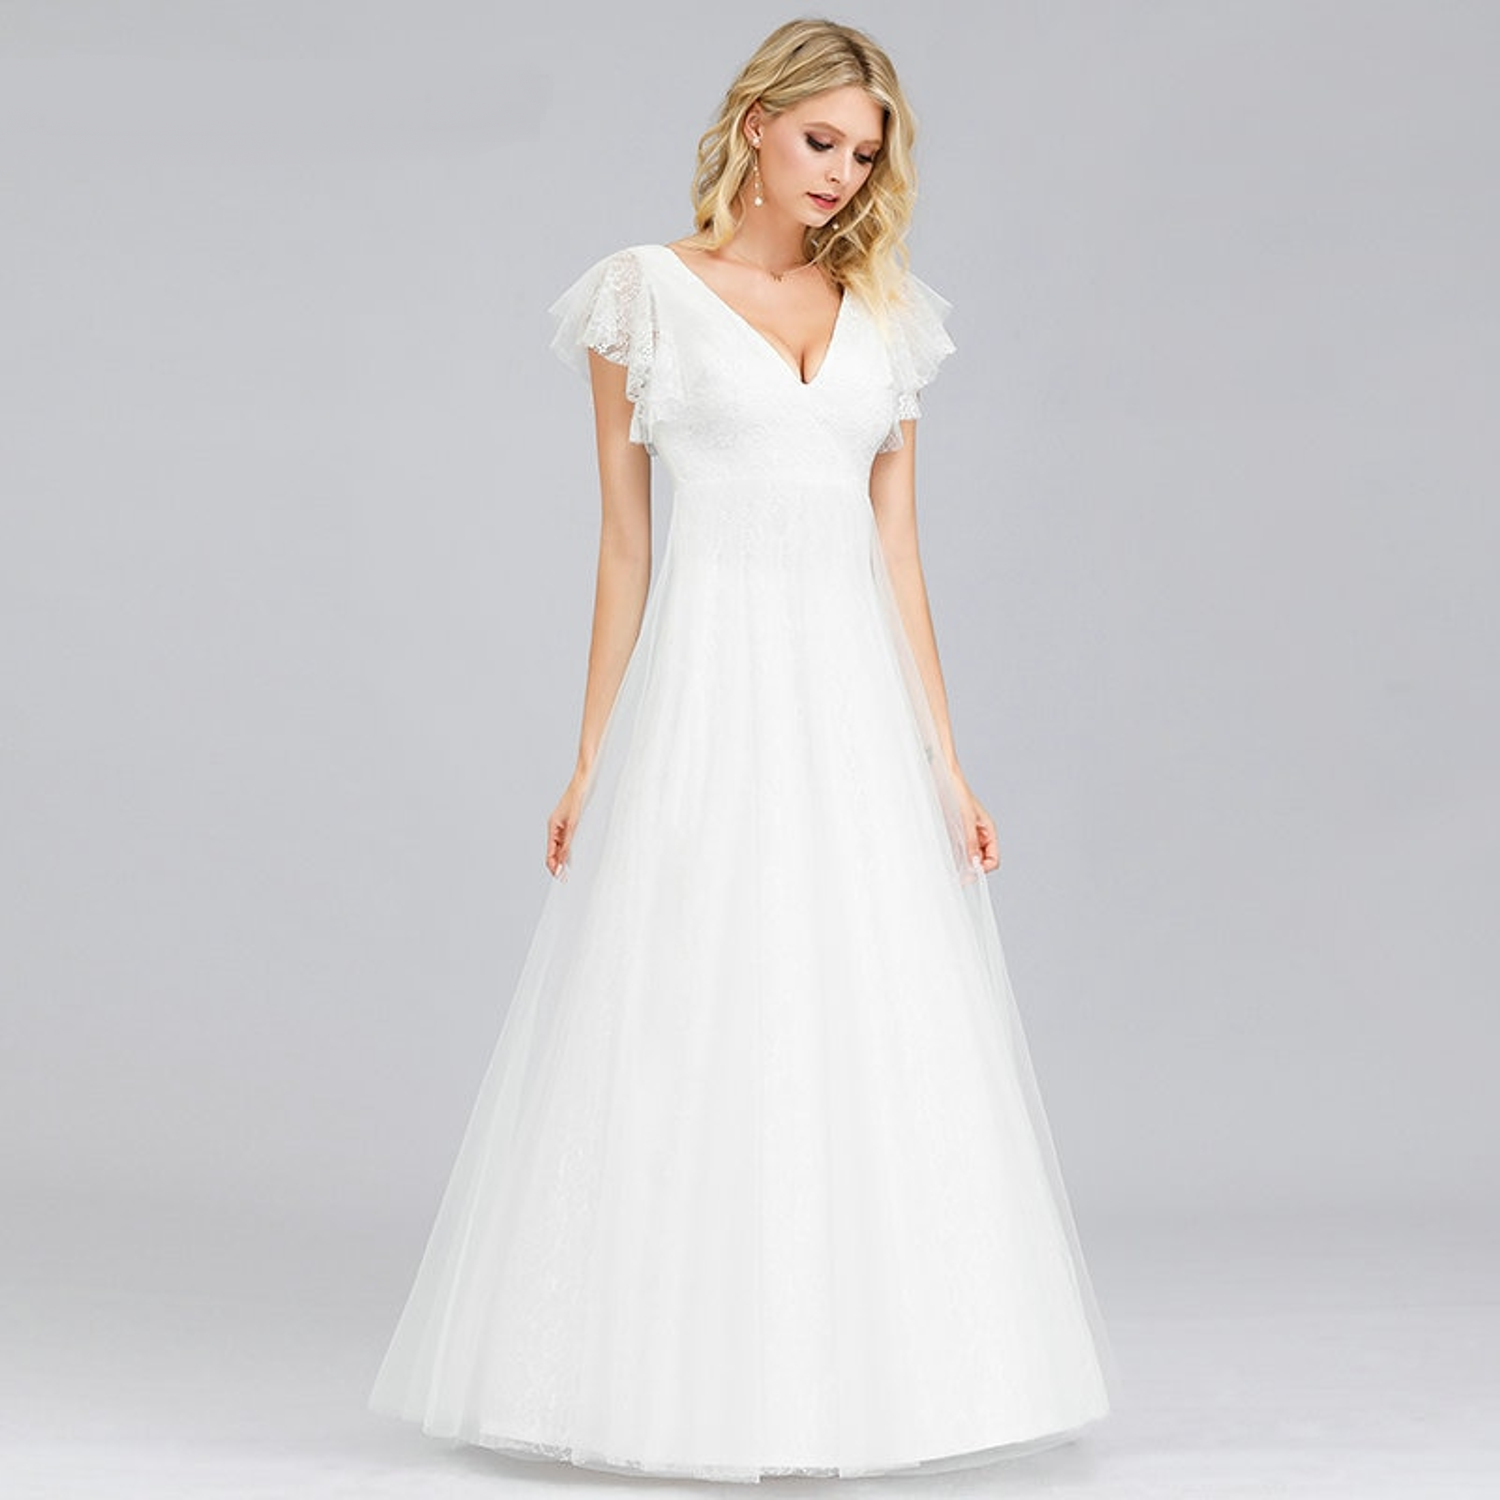 Wedding dress with flutter sleeves